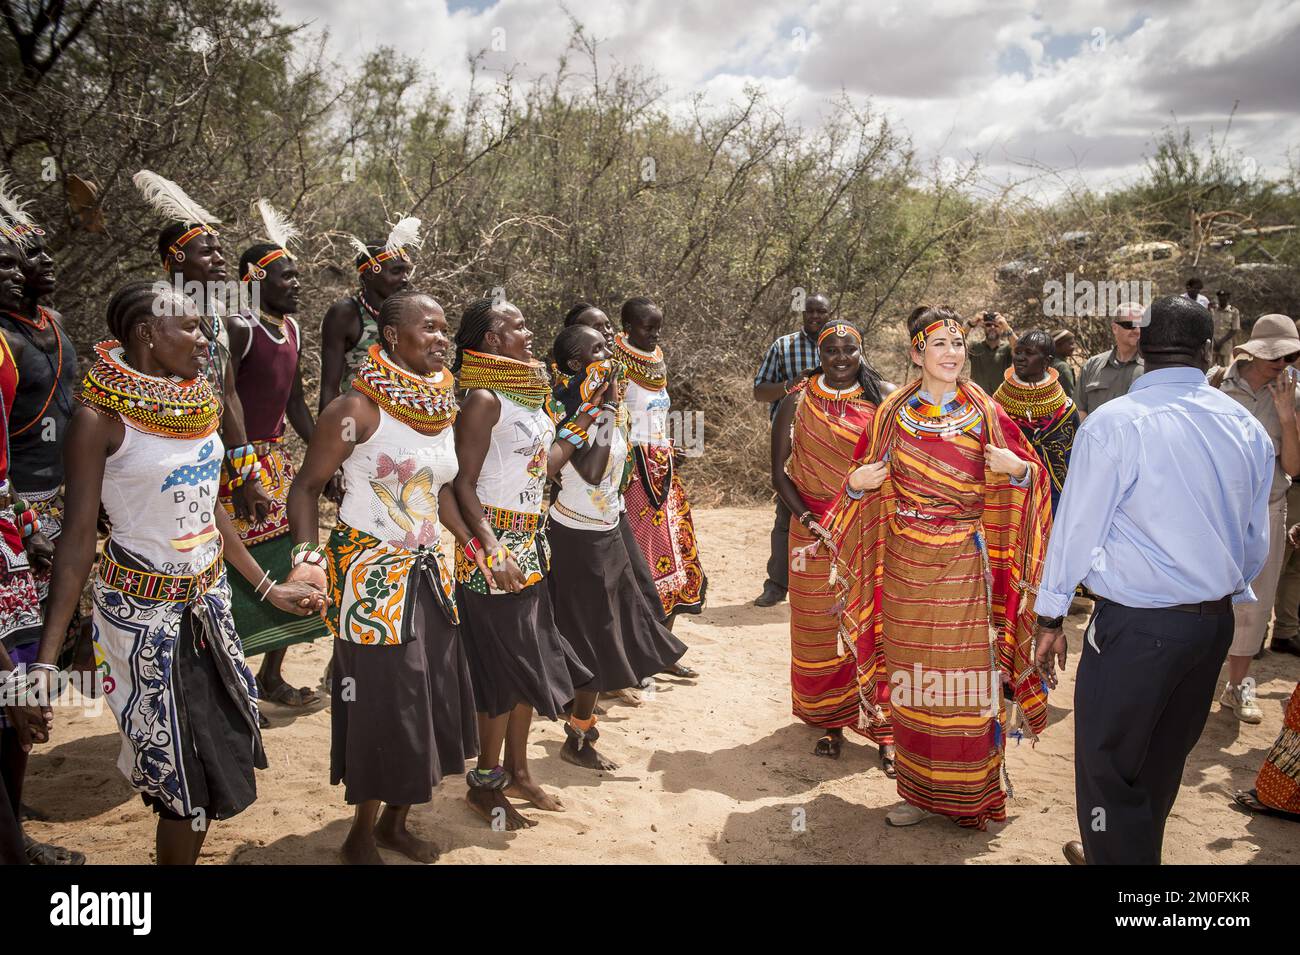 On November 27th and 28th 2018 HRH Crown Princess Mary visited Kalama in Kenya along with the Minister for Development Ulla Tørnæs. They arrived at the Kalama Airstrip in Samburu Country on November 27th and were greeted by prominent members of the Kalama societies. Hereafter they visited the Kalama Conservancy where they met with local women who have benefited from Danish support to create small sustainable businesses. The whole visit has as a special focus the promotion of women's rights and economic independence through local projects. Stock Photo